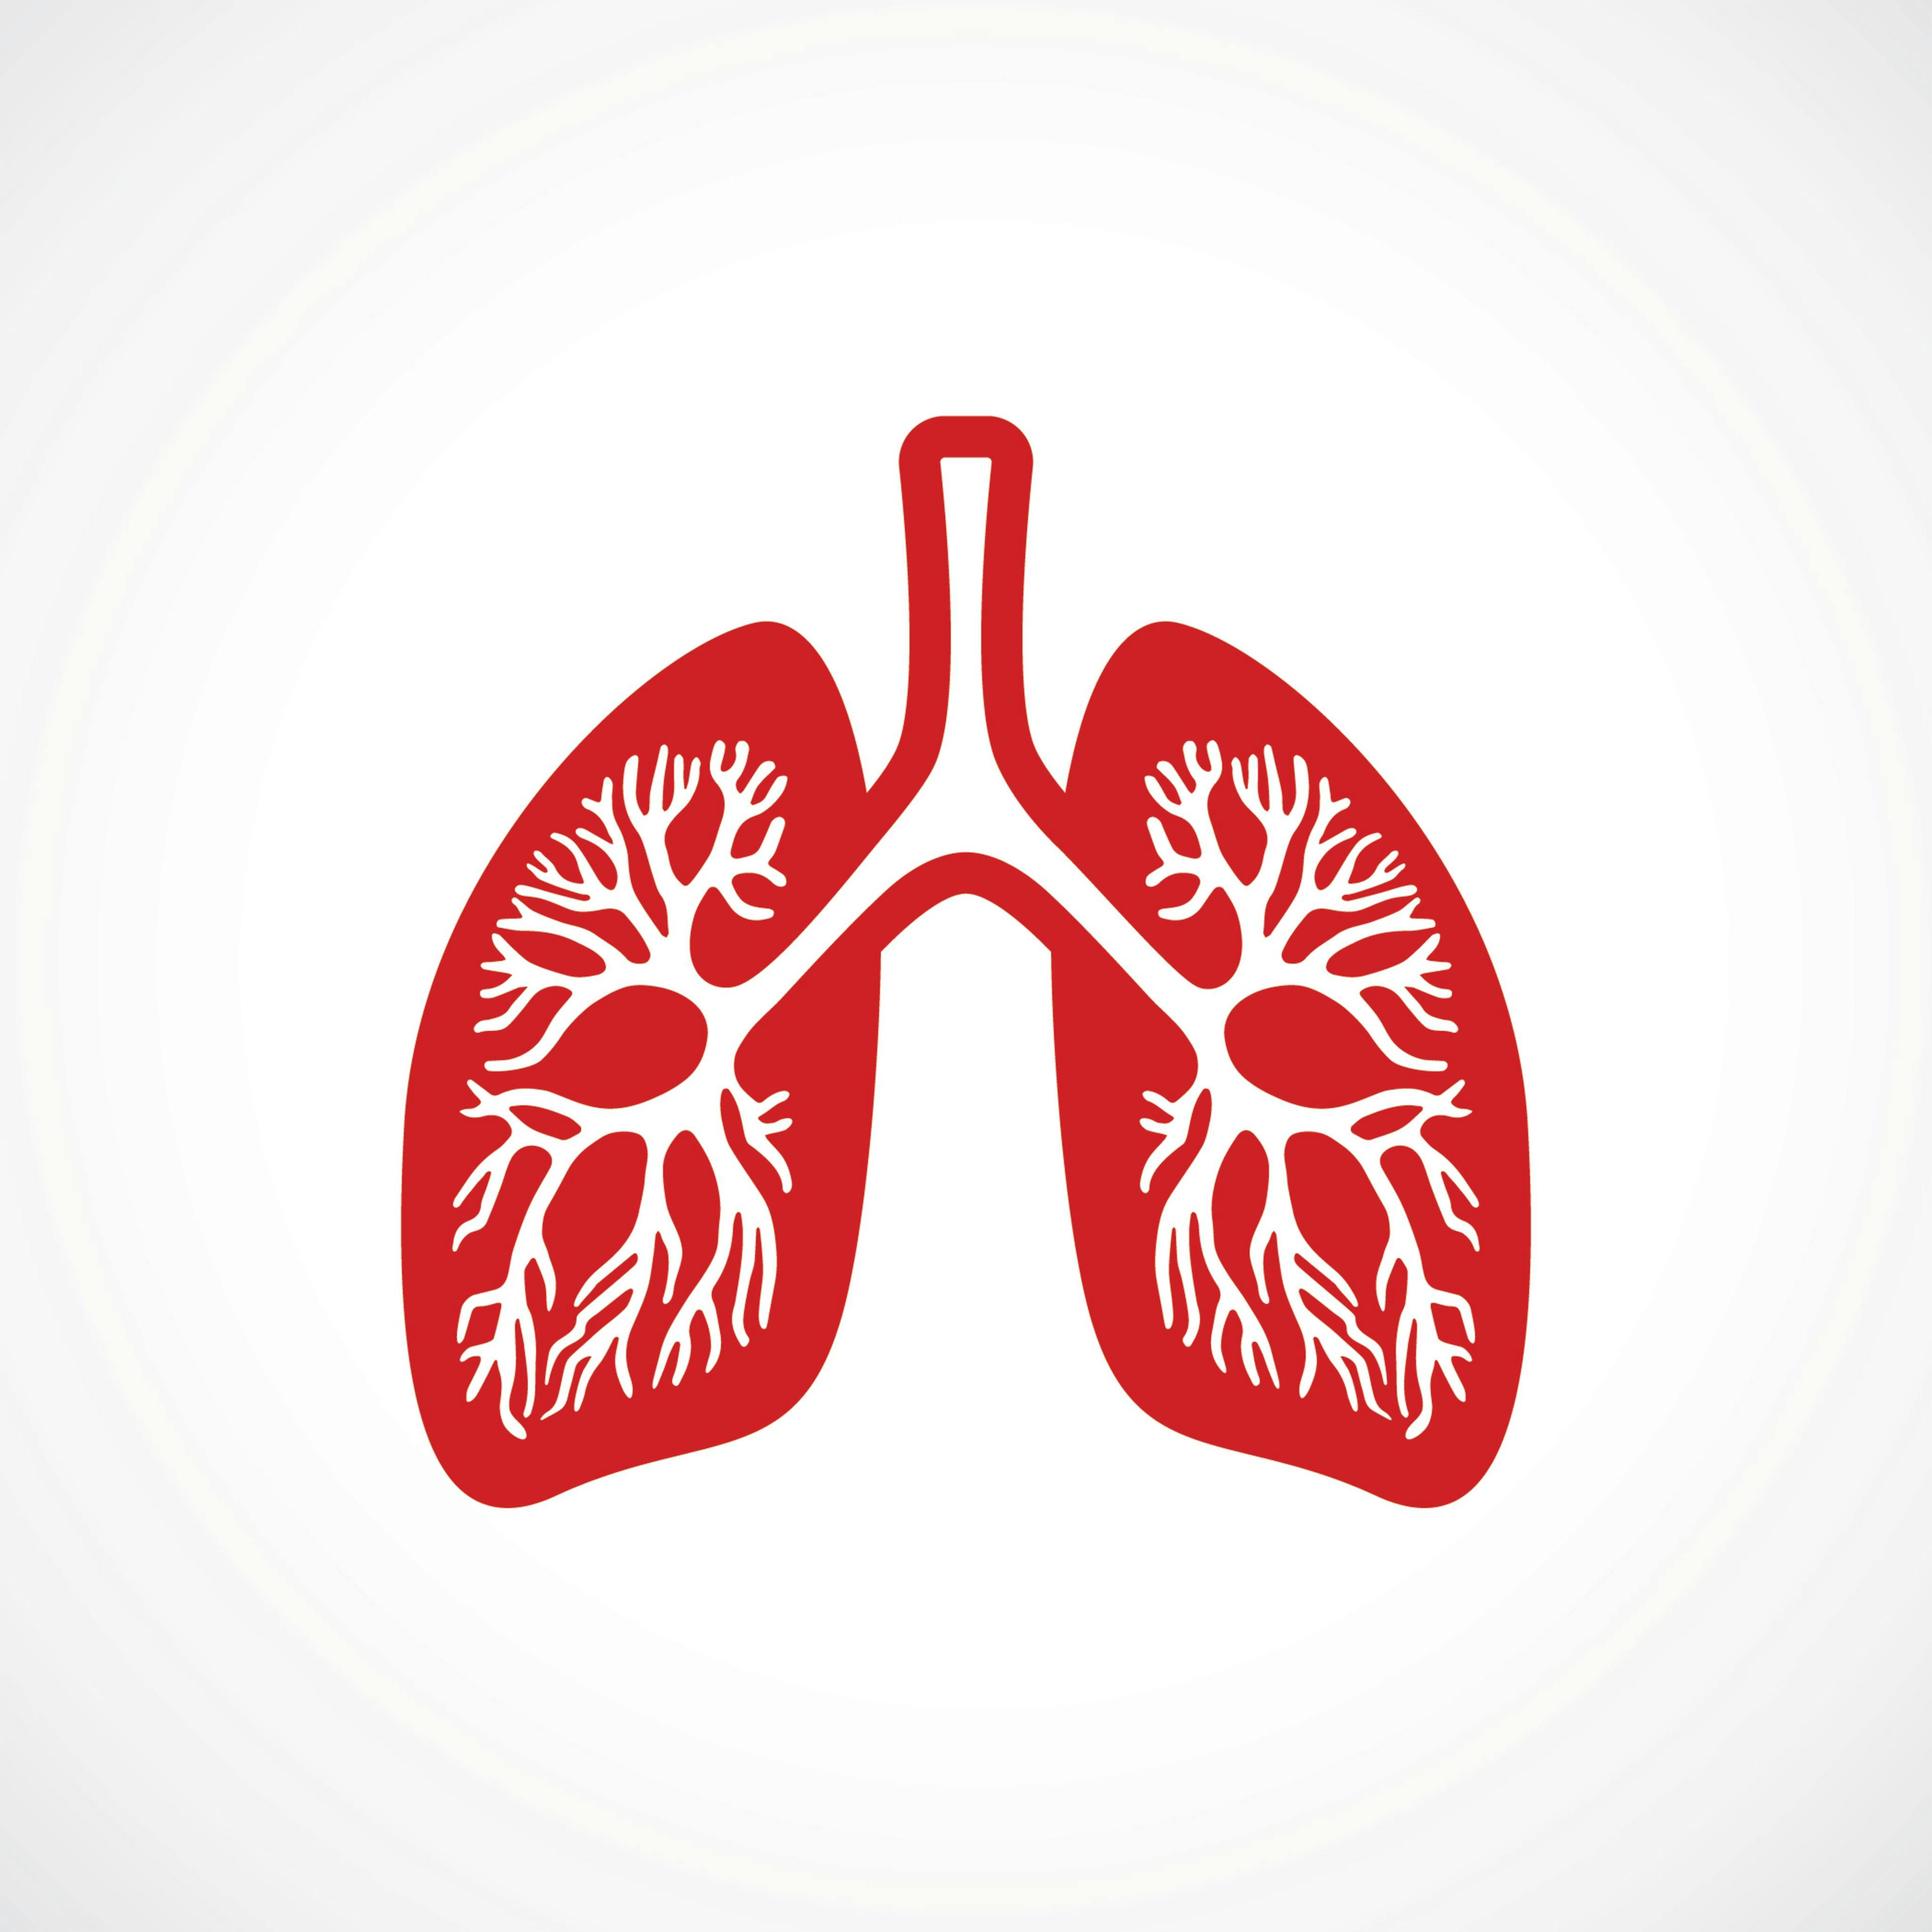 COVID-19 Symptoms Can Differentiate Respiratory Diseases, Study Says